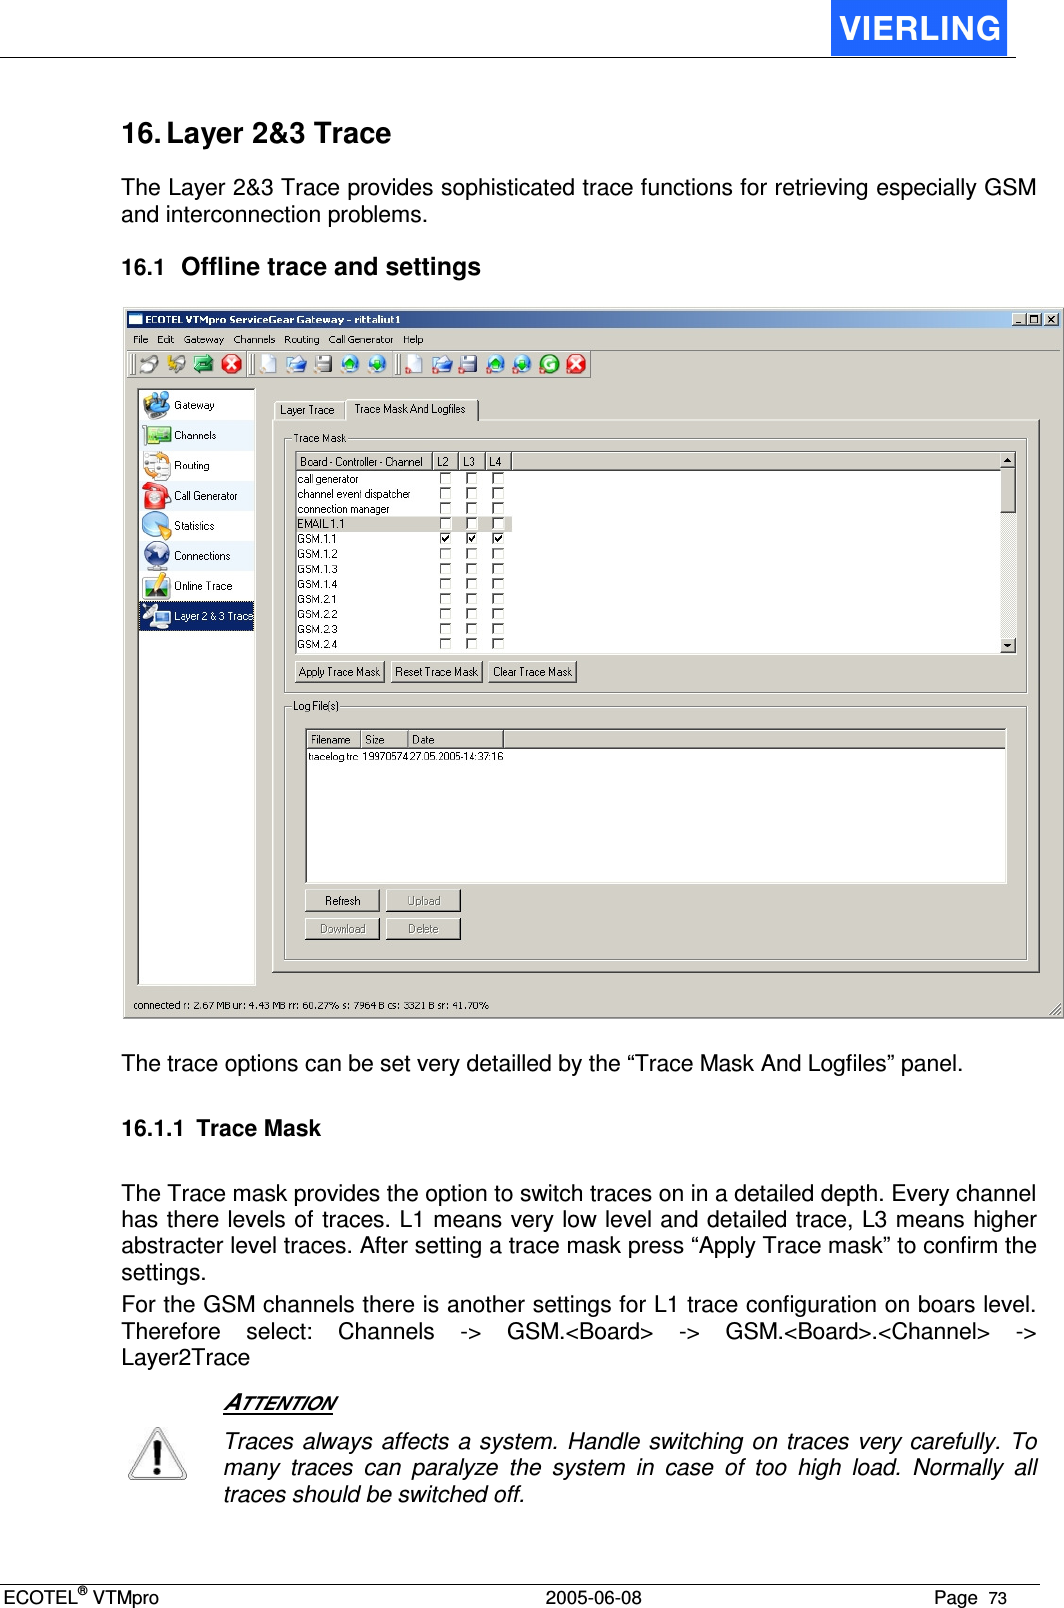 ECOTEL® VTMpro  2005-06-08 Page  73    16. Layer 2&amp;3 Trace The Layer 2&amp;3 Trace provides sophisticated trace functions for retrieving especially GSM and interconnection problems. 16.1 Offline trace and settings   The trace options can be set very detailled by the “Trace Mask And Logfiles” panel.   16.1.1  Trace Mask The Trace mask provides the option to switch traces on in a detailed depth. Every channel has there levels of traces. L1 means very low level and detailed trace, L3 means higher abstracter level traces. After setting a trace mask press “Apply Trace mask” to confirm the settings. For the GSM channels there is another settings for L1 trace configuration on boars level. Therefore  select:  Channels  -&gt;  GSM.&lt;Board&gt;  -&gt;  GSM.&lt;Board&gt;.&lt;Channel&gt;  -&gt; Layer2Trace   ATTENTION  Traces always affects a system. Handle switching on traces very carefully. To many  traces  can  paralyze  the  system  in  case  of  too  high  load.  Normally  all traces should be switched off.  